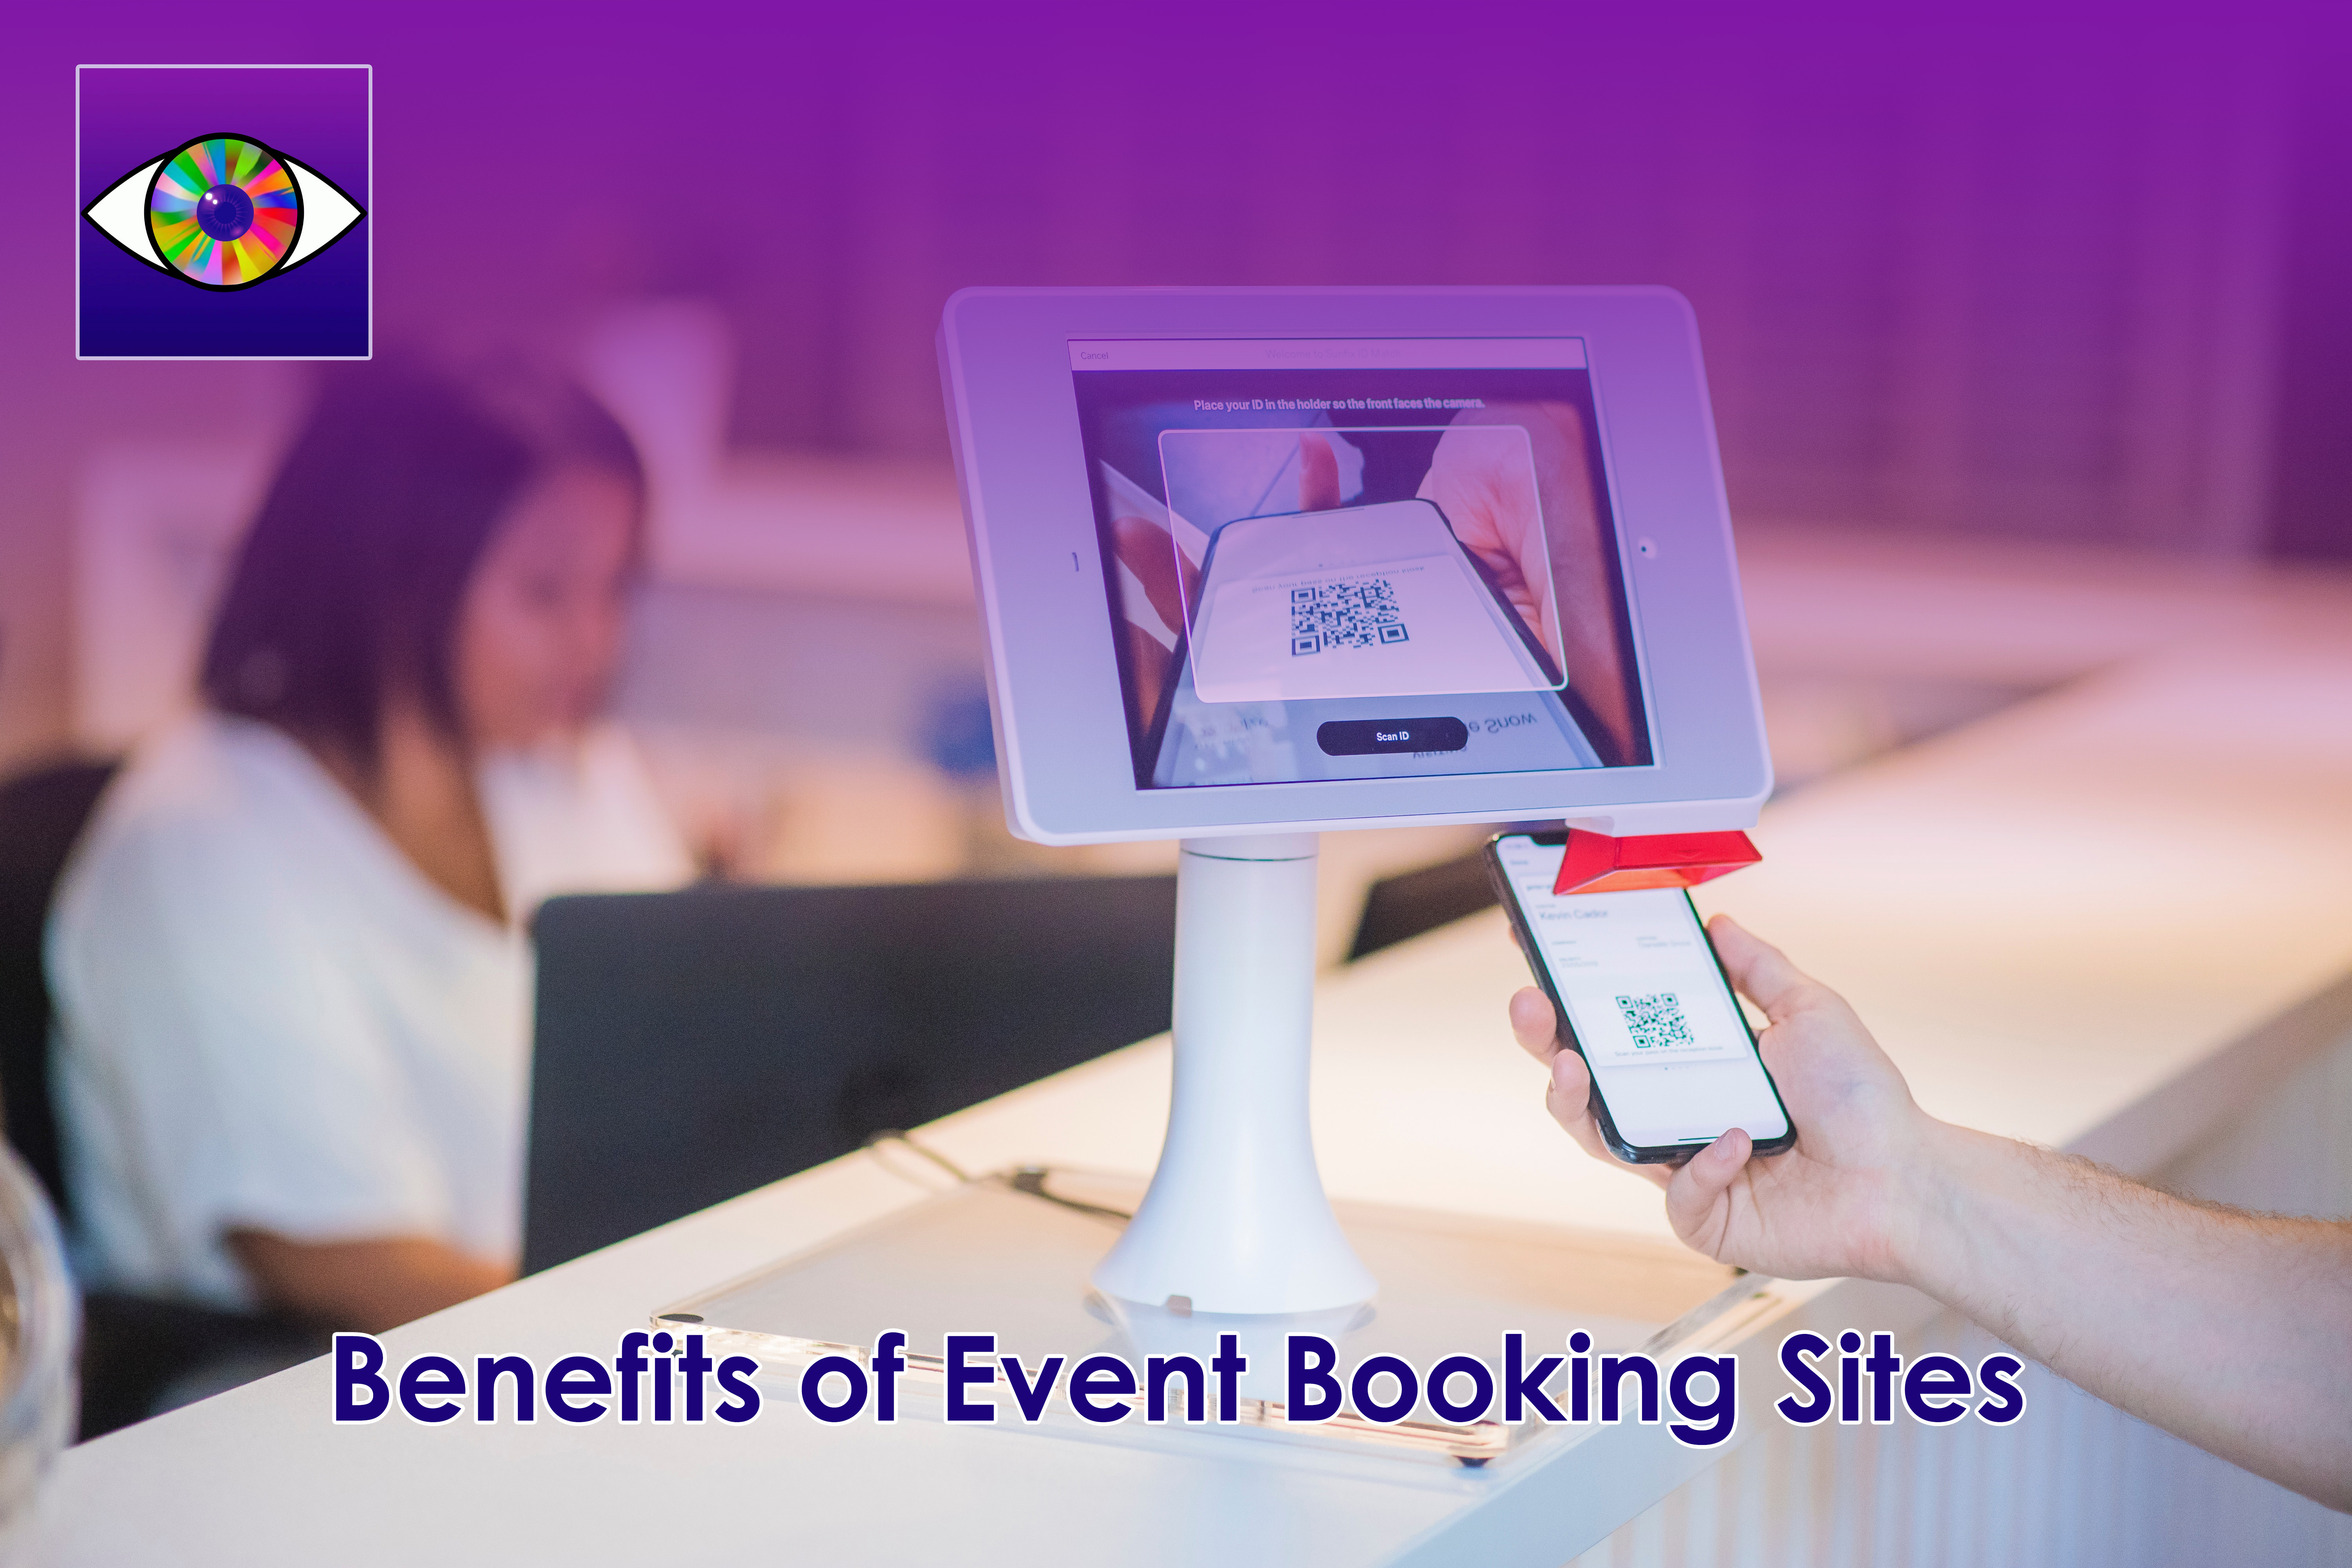 Benefits of event booking sites